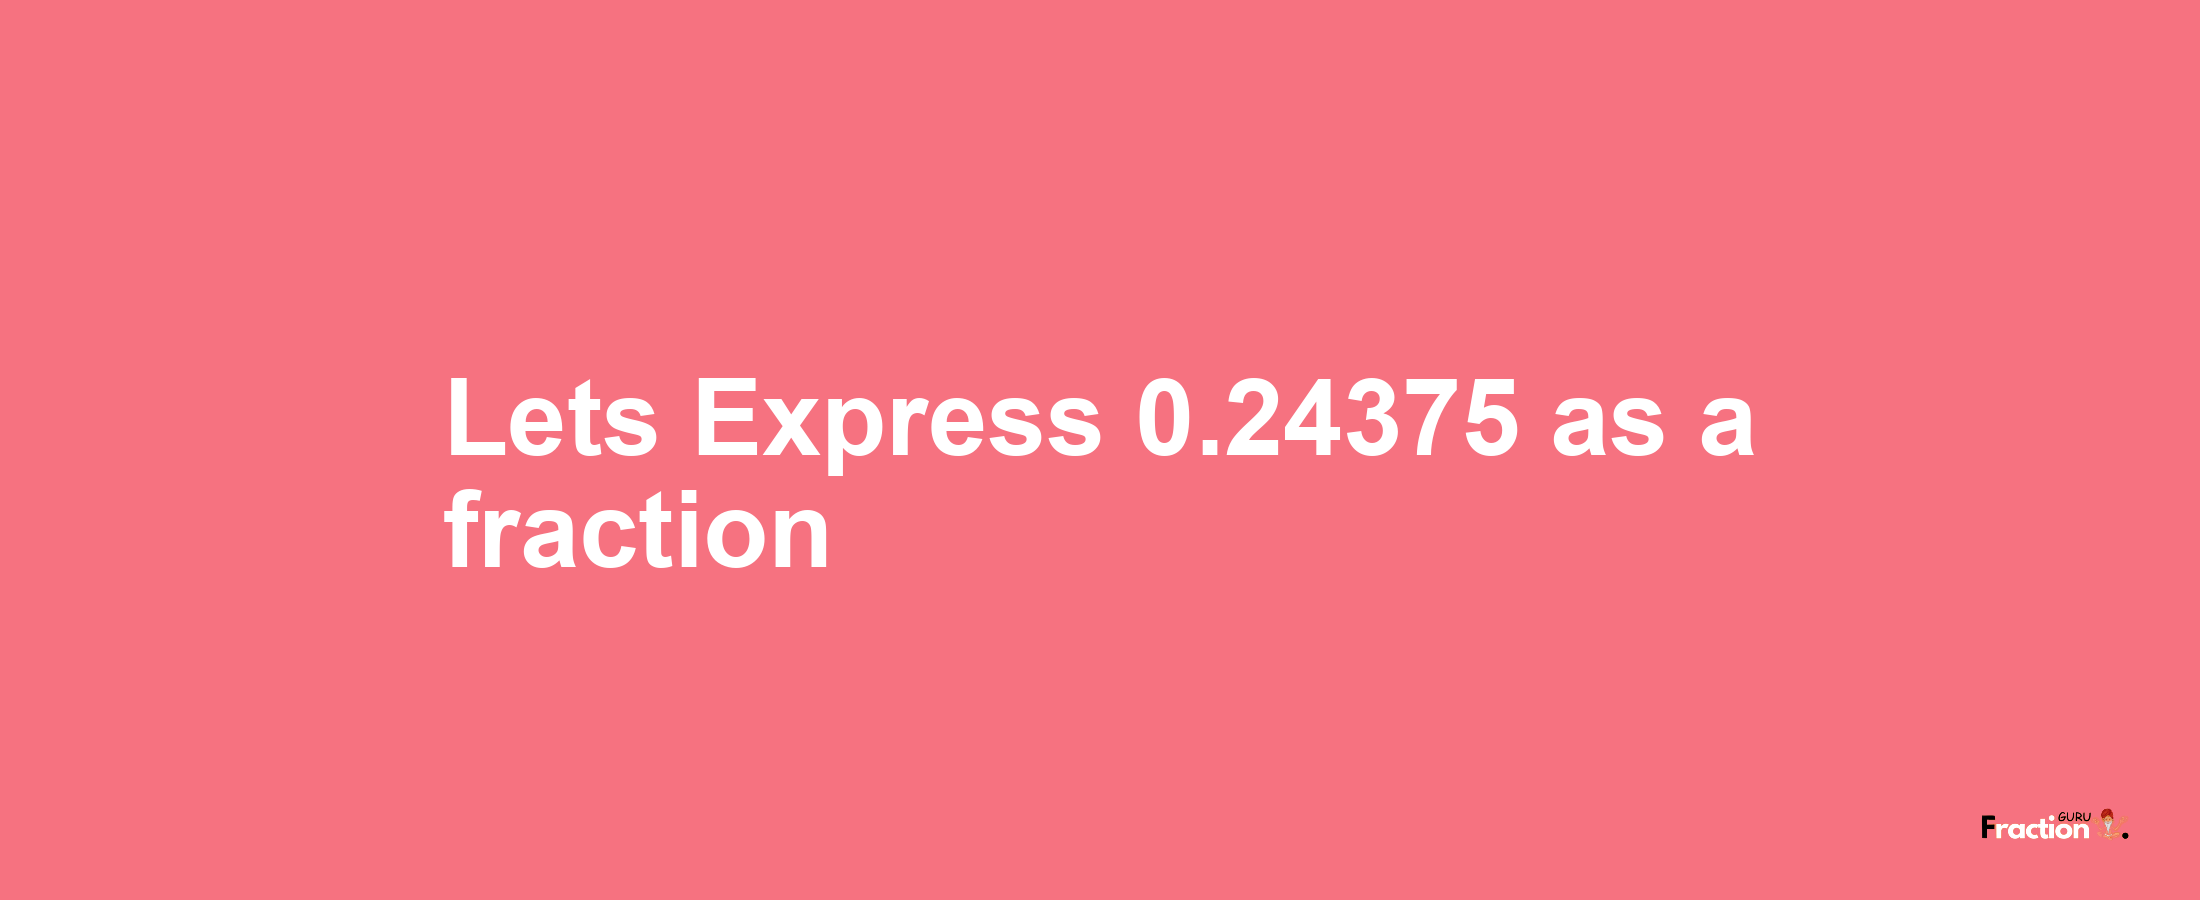 Lets Express 0.24375 as afraction